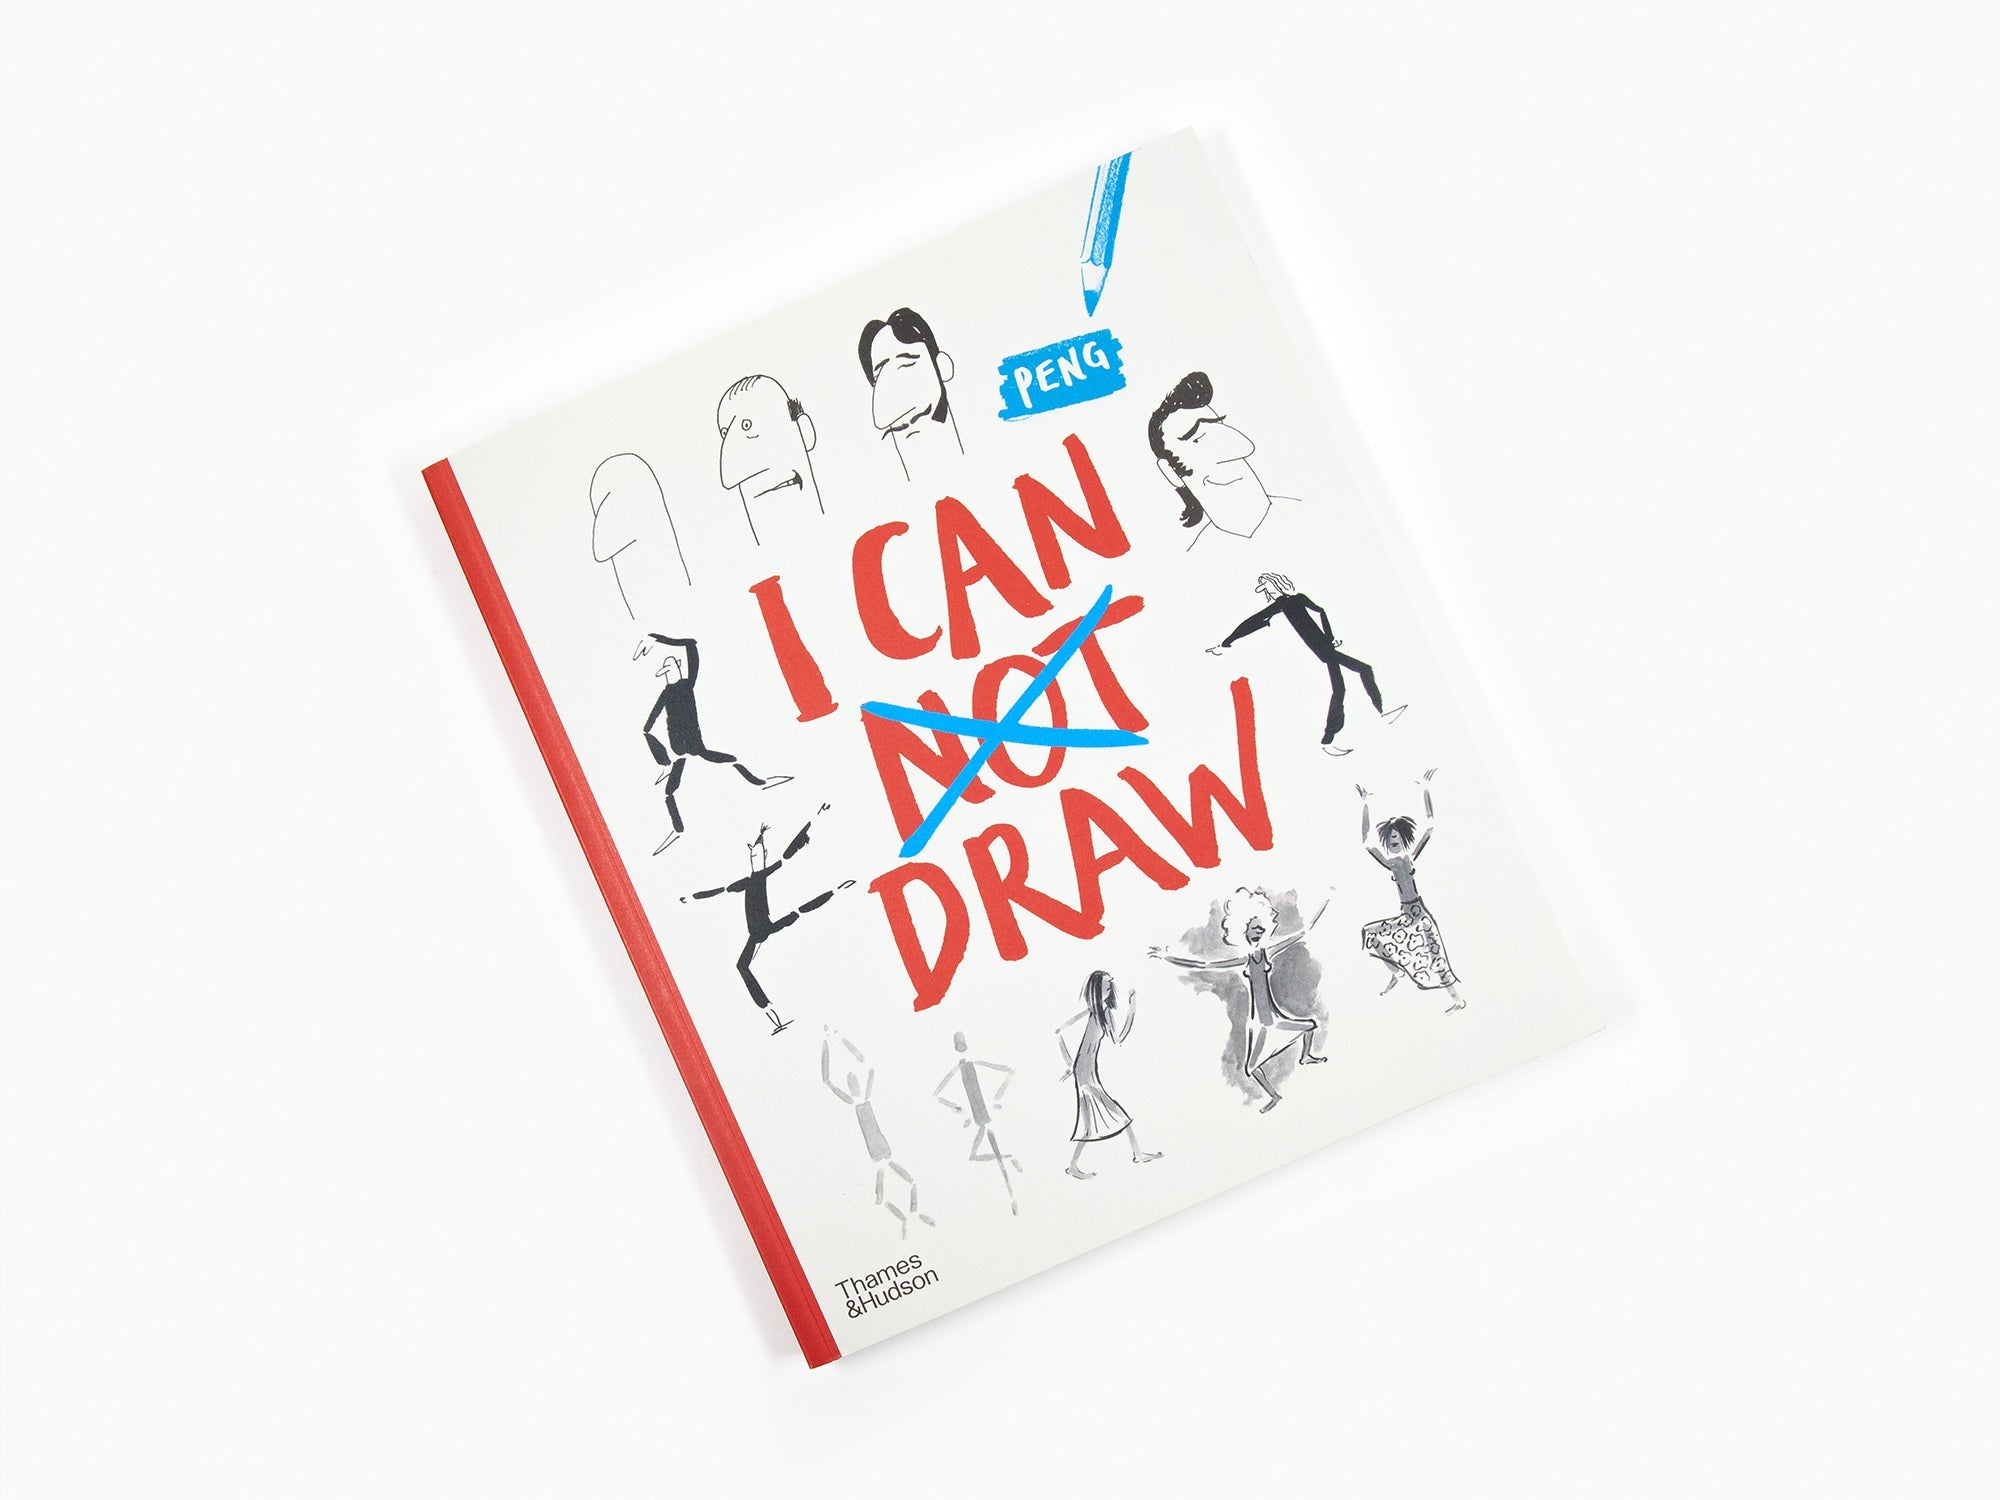 Peng - I can (not) draw